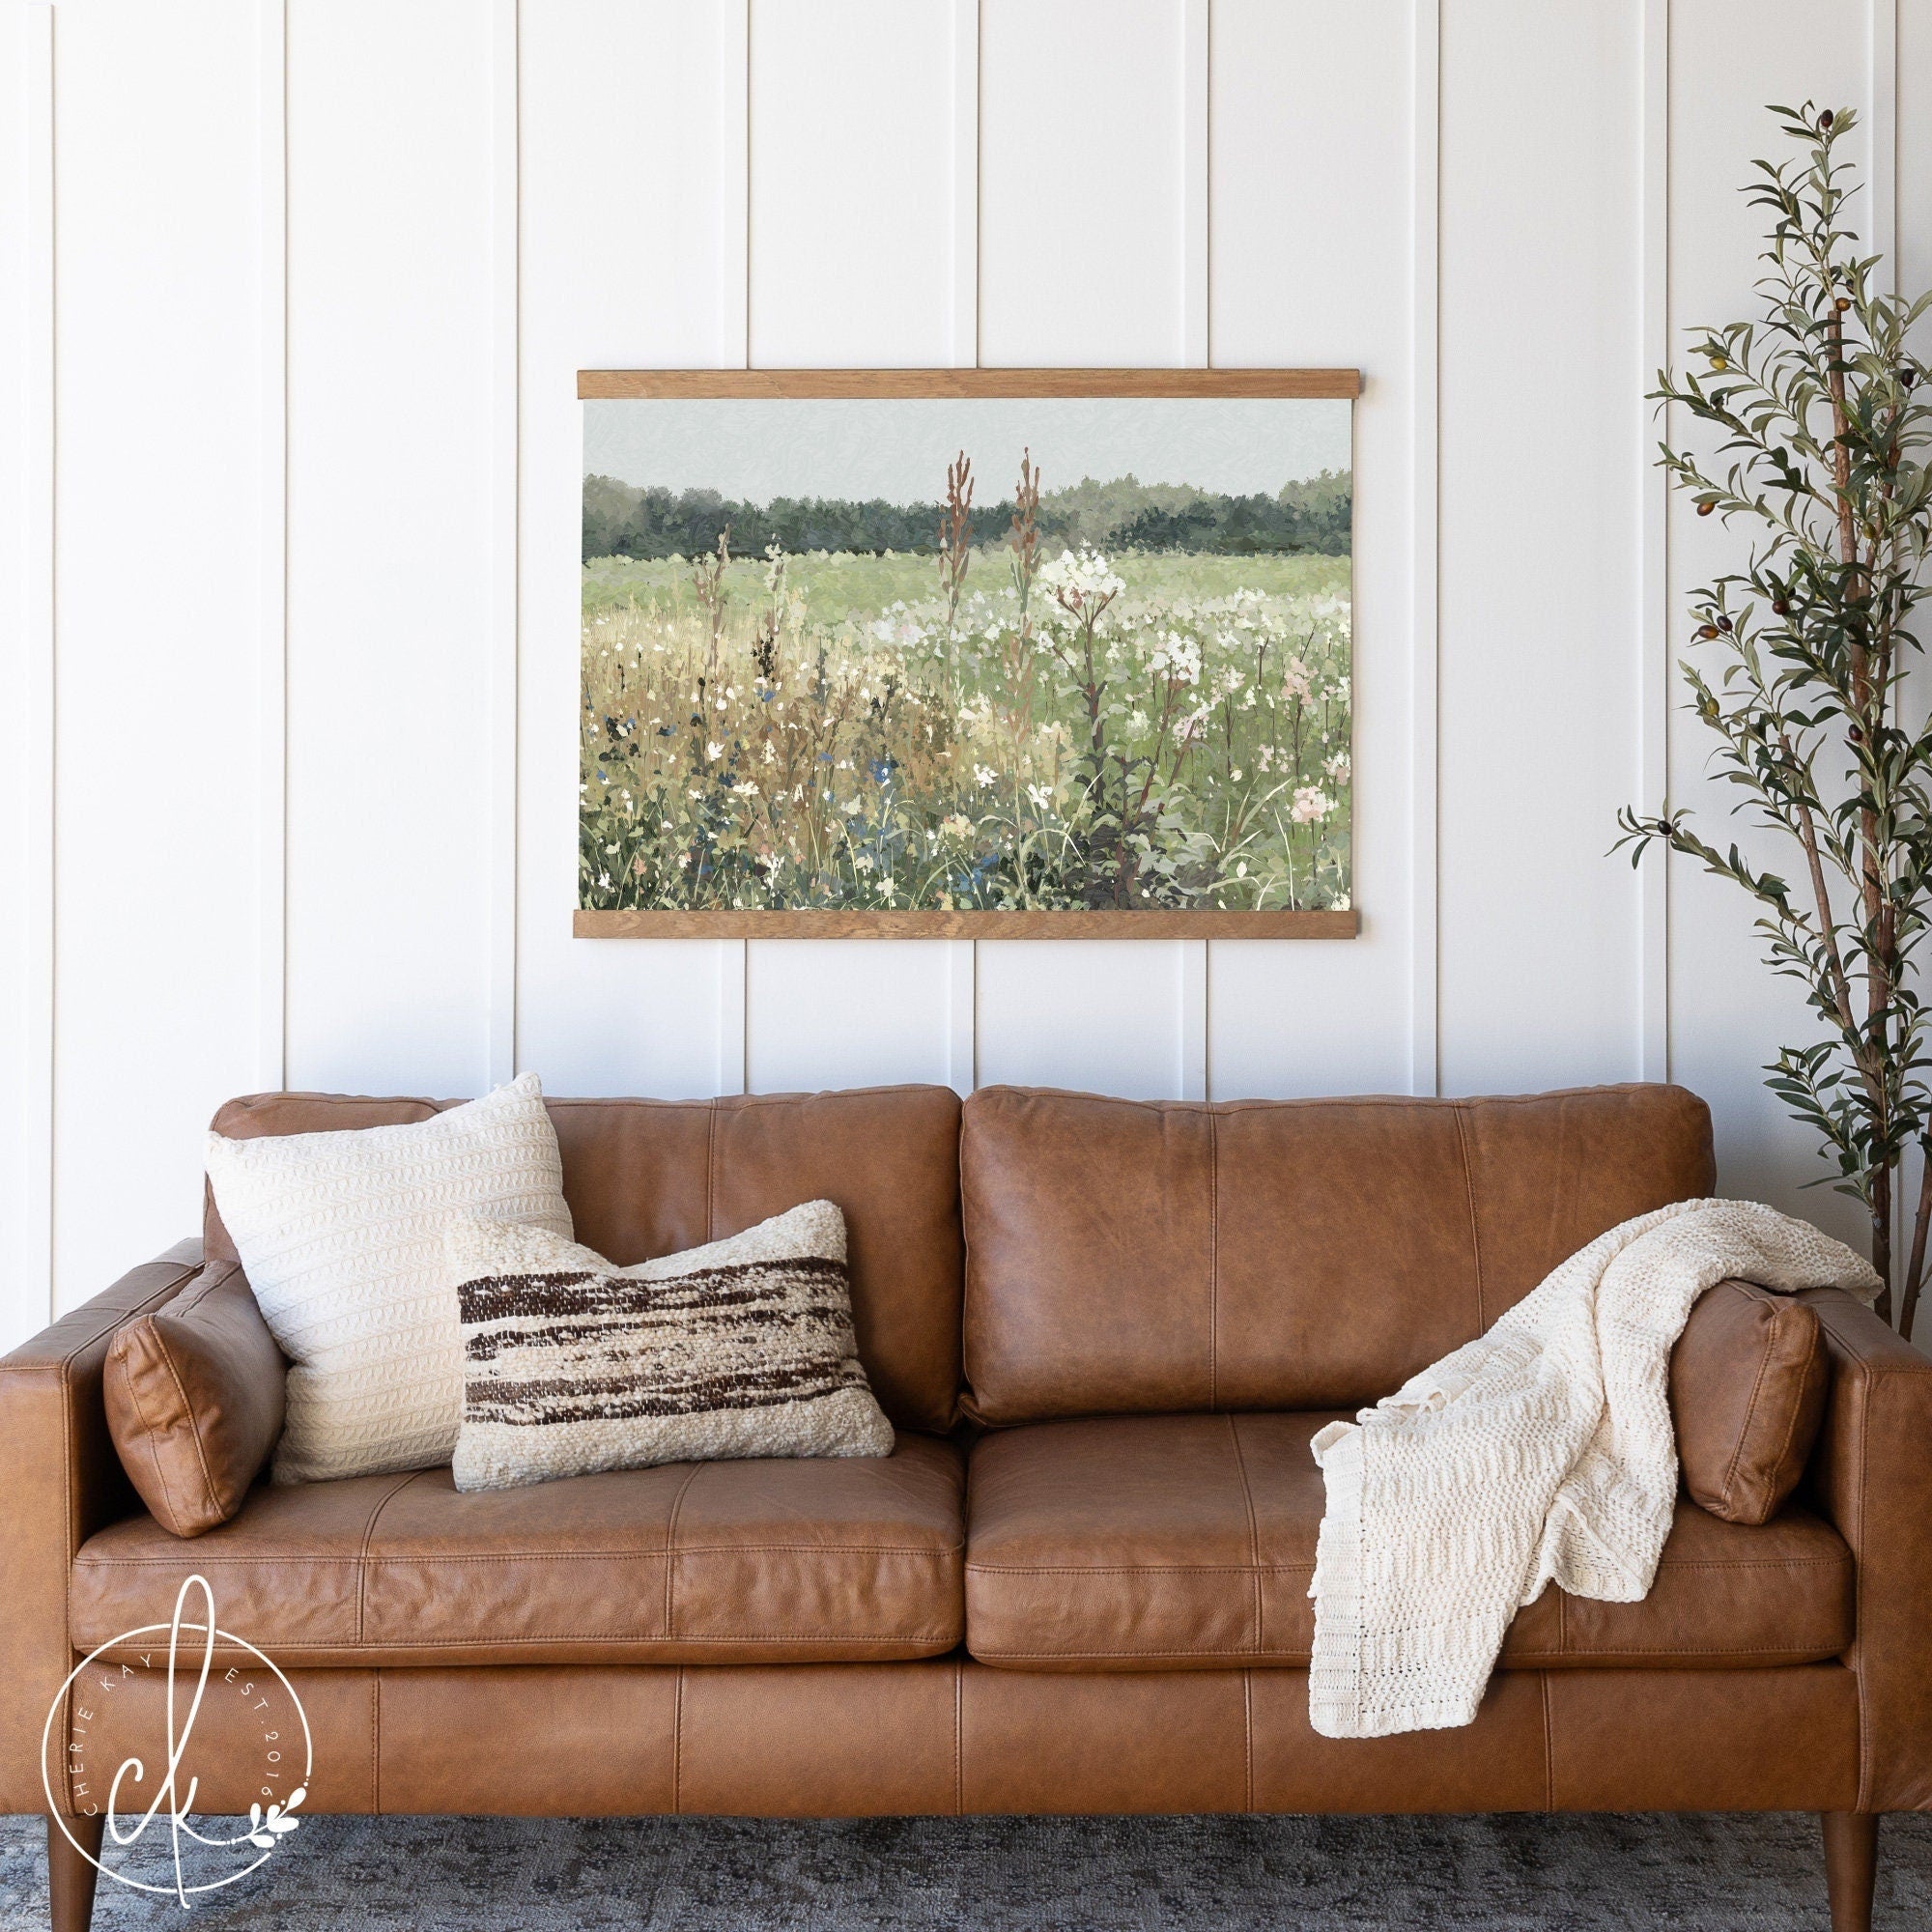 Wildflower Field Art | Canvas Tapestry | Meadow Wall Art | Landscape Canvas Art | Fabric Wall Hanging | Living Room Wall Decor